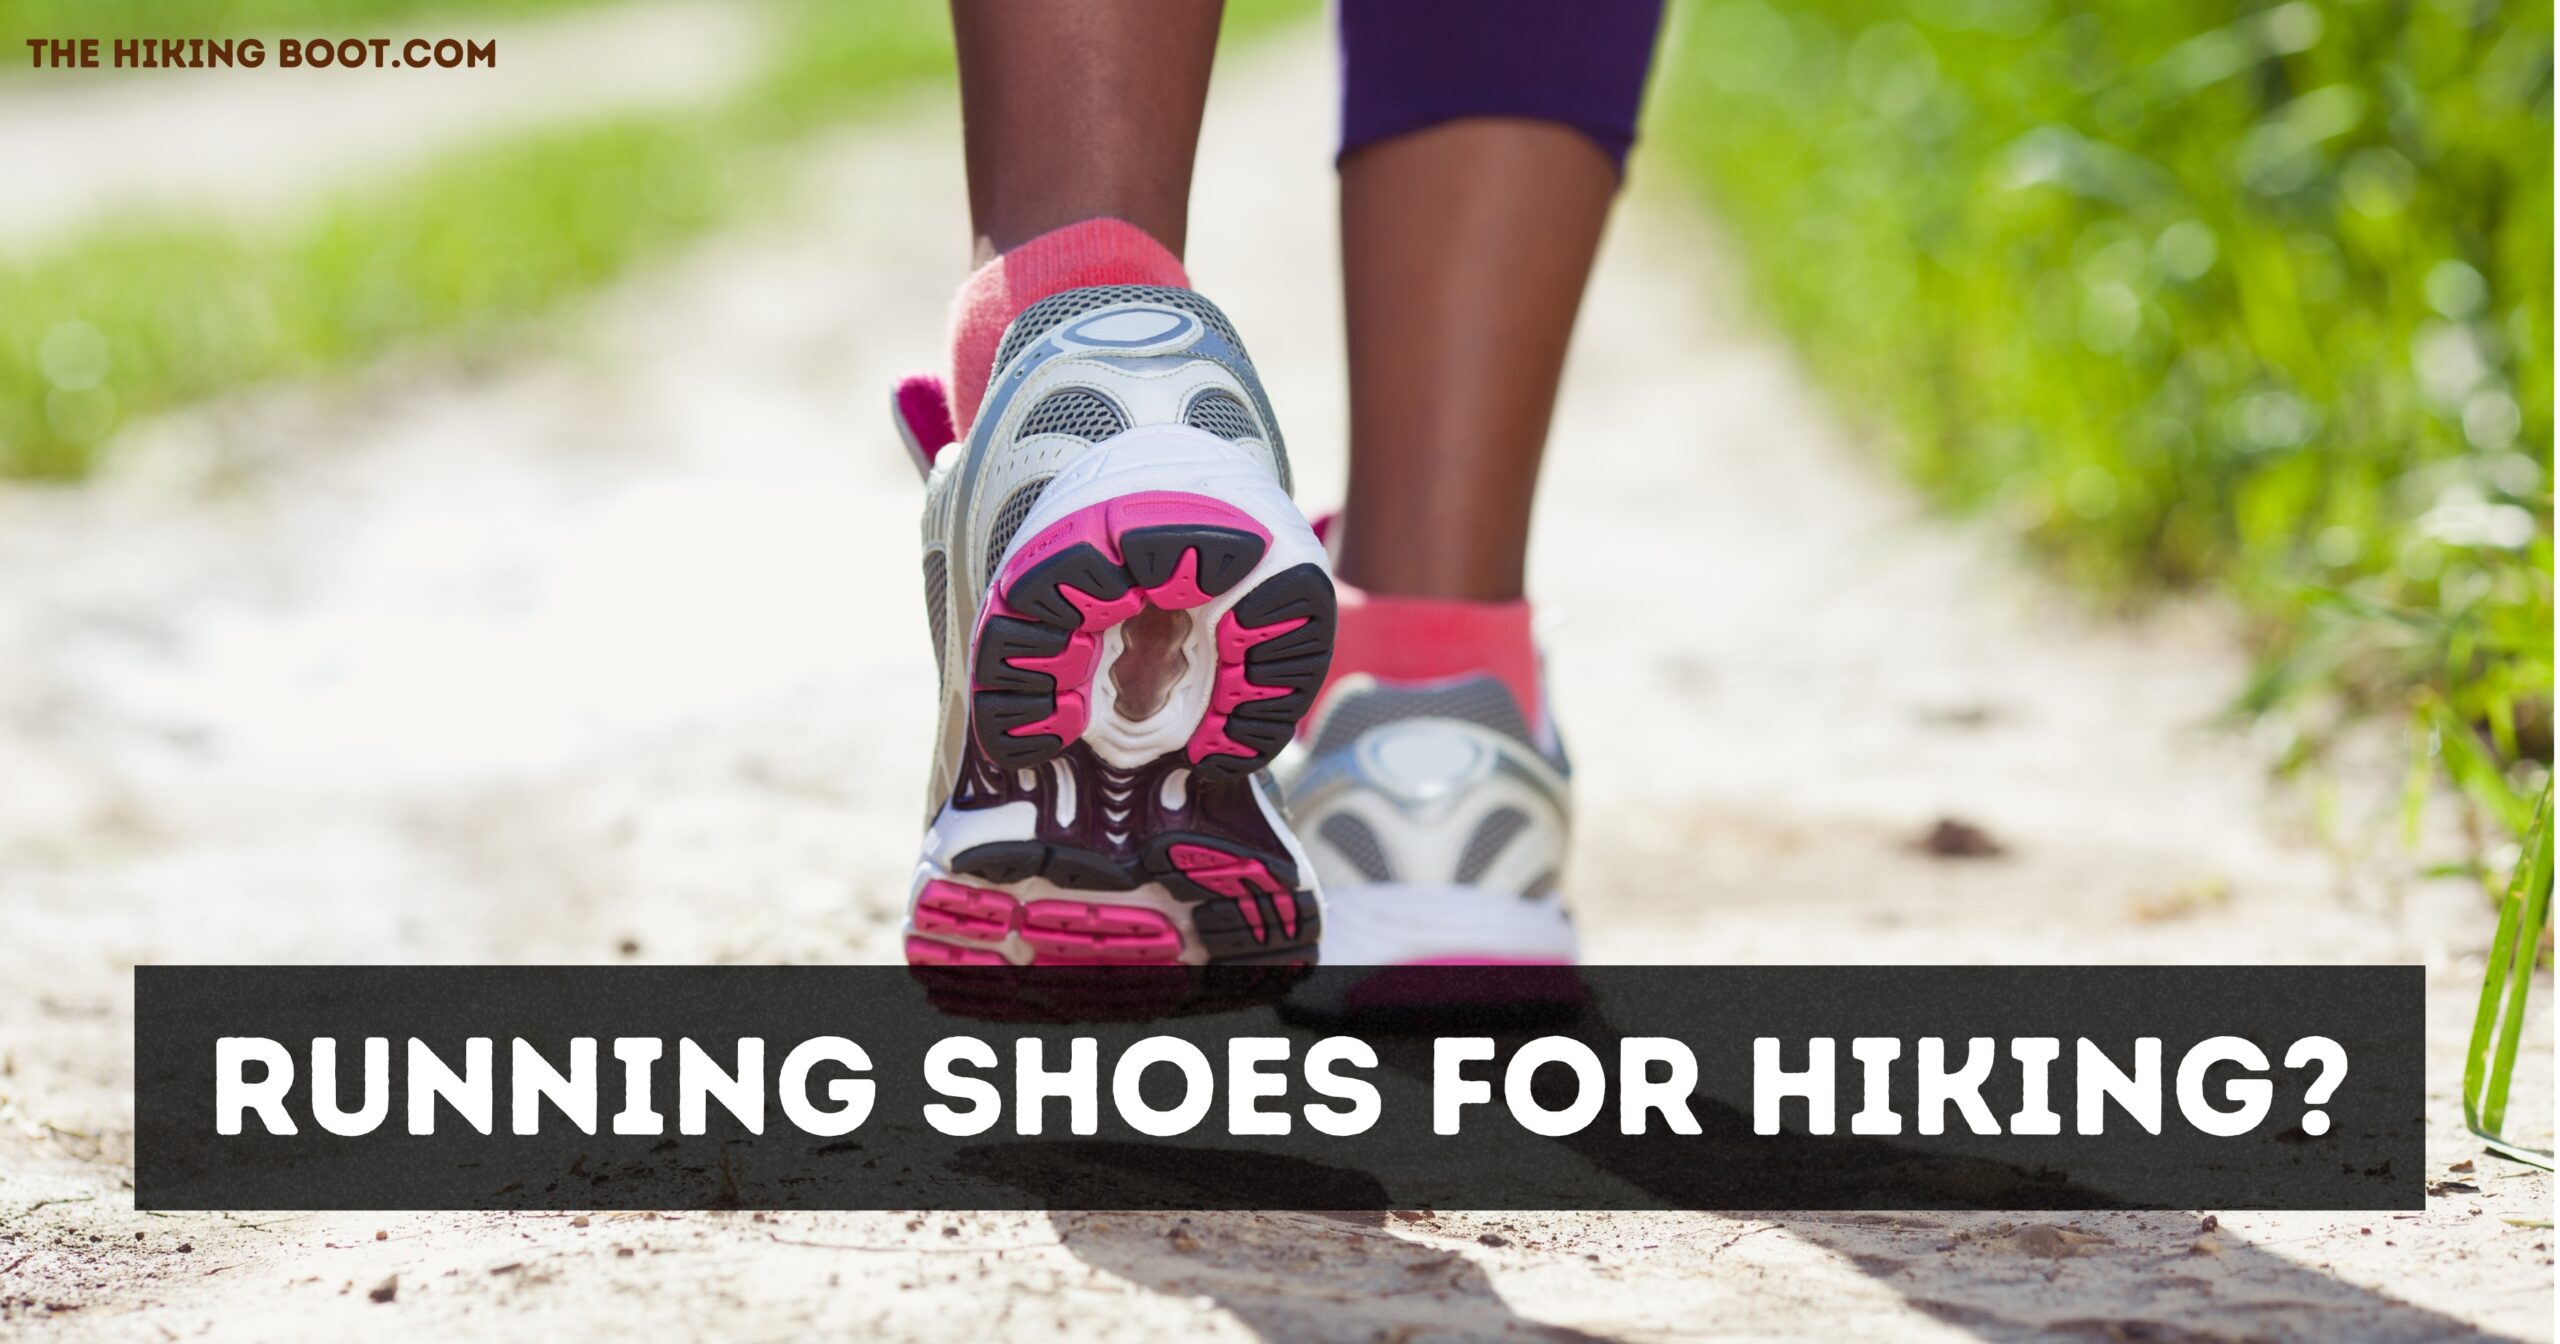 are running shoes good for hiking